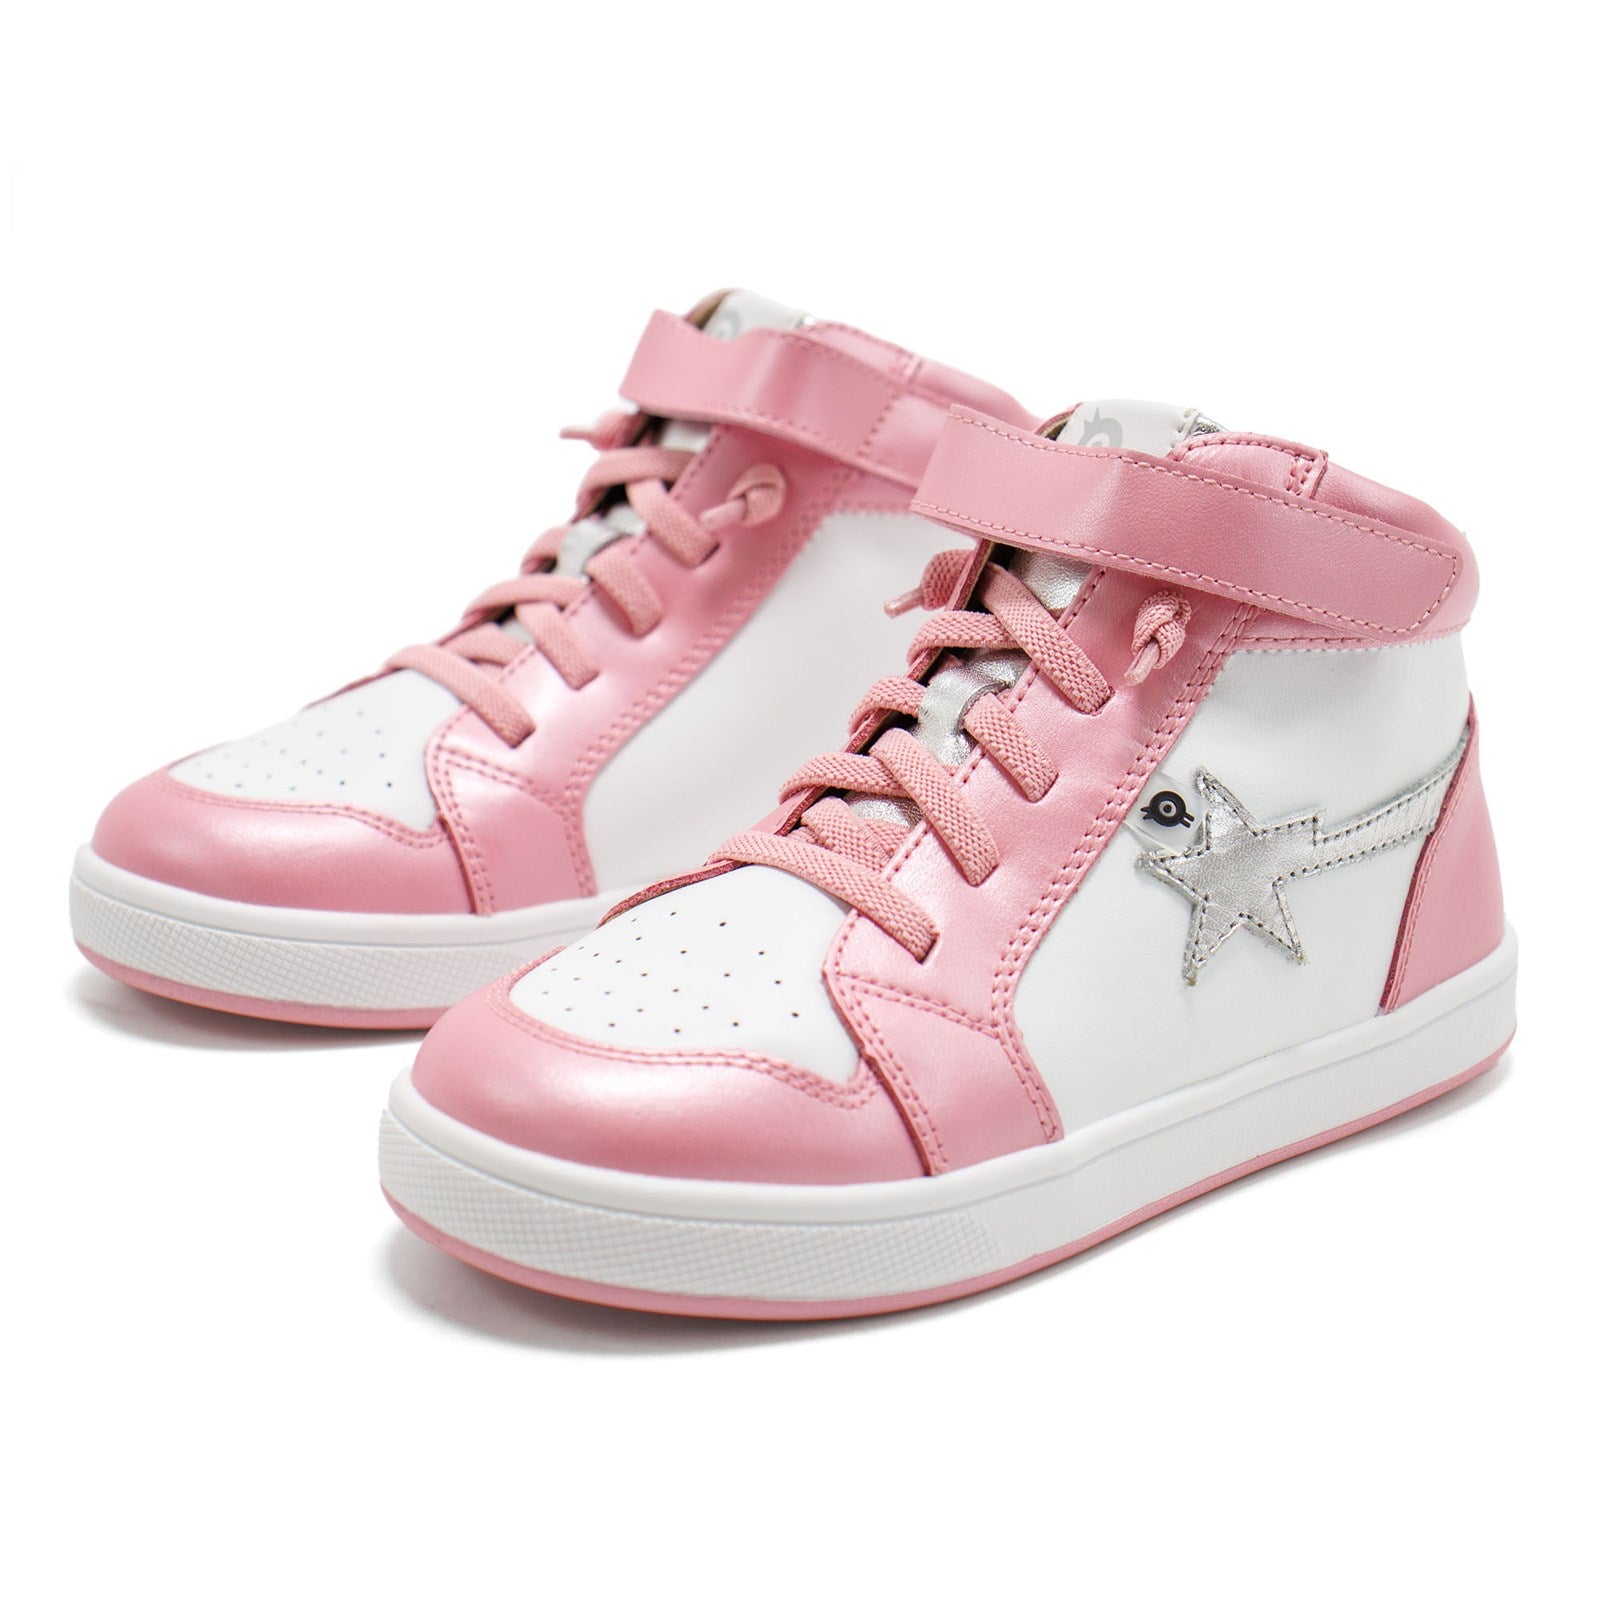 Old Soles Girl Team Star High Top Lace-Up Sneakers